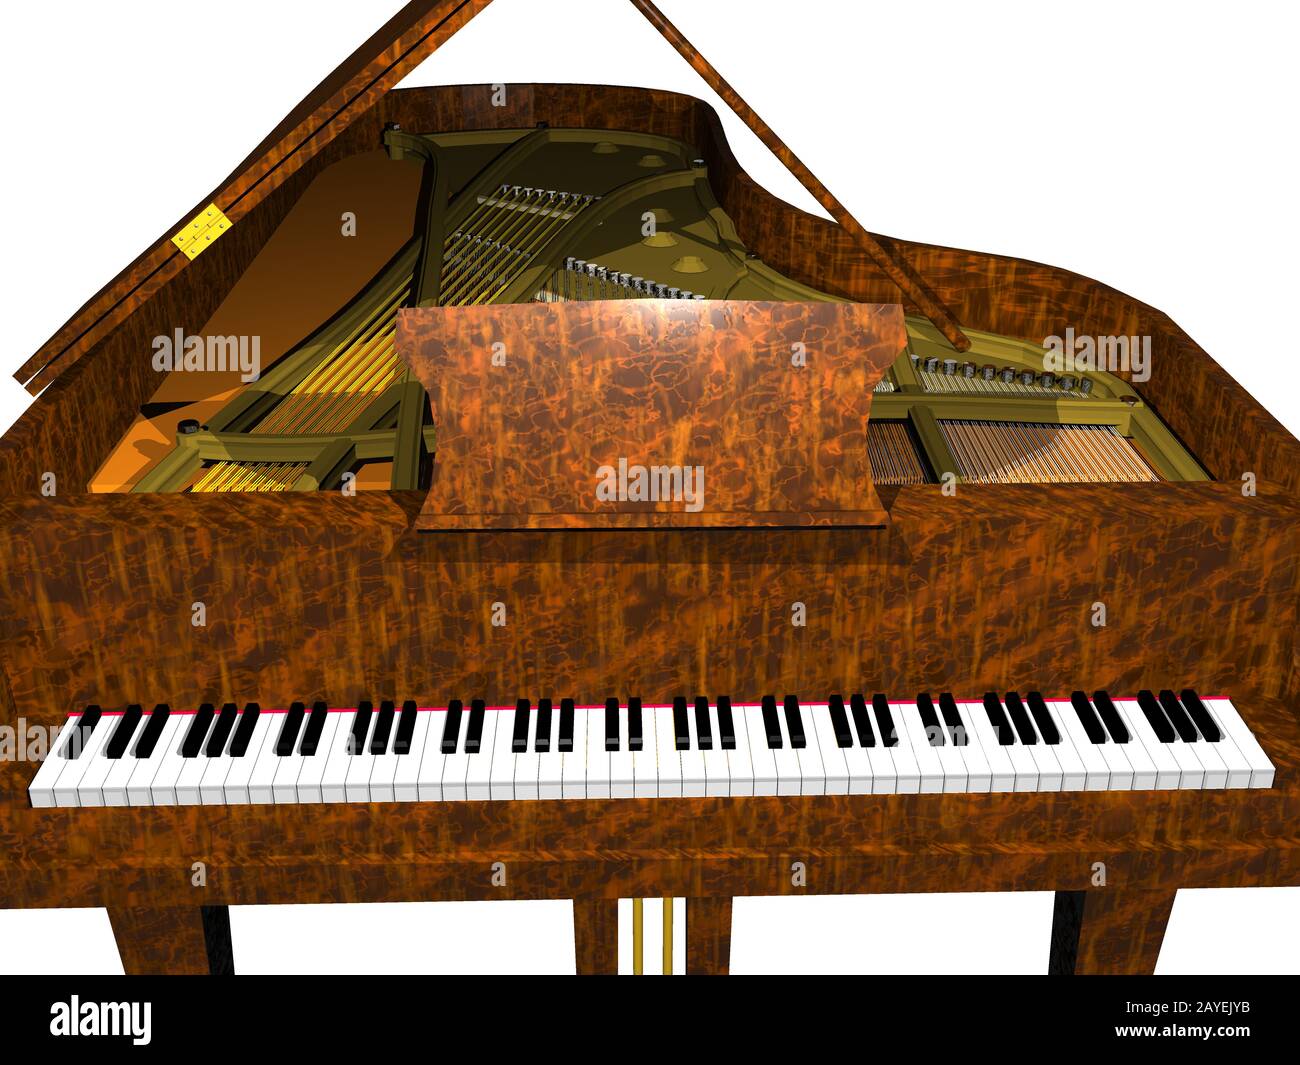 unfolded wooden concert grand piano Stock Photo